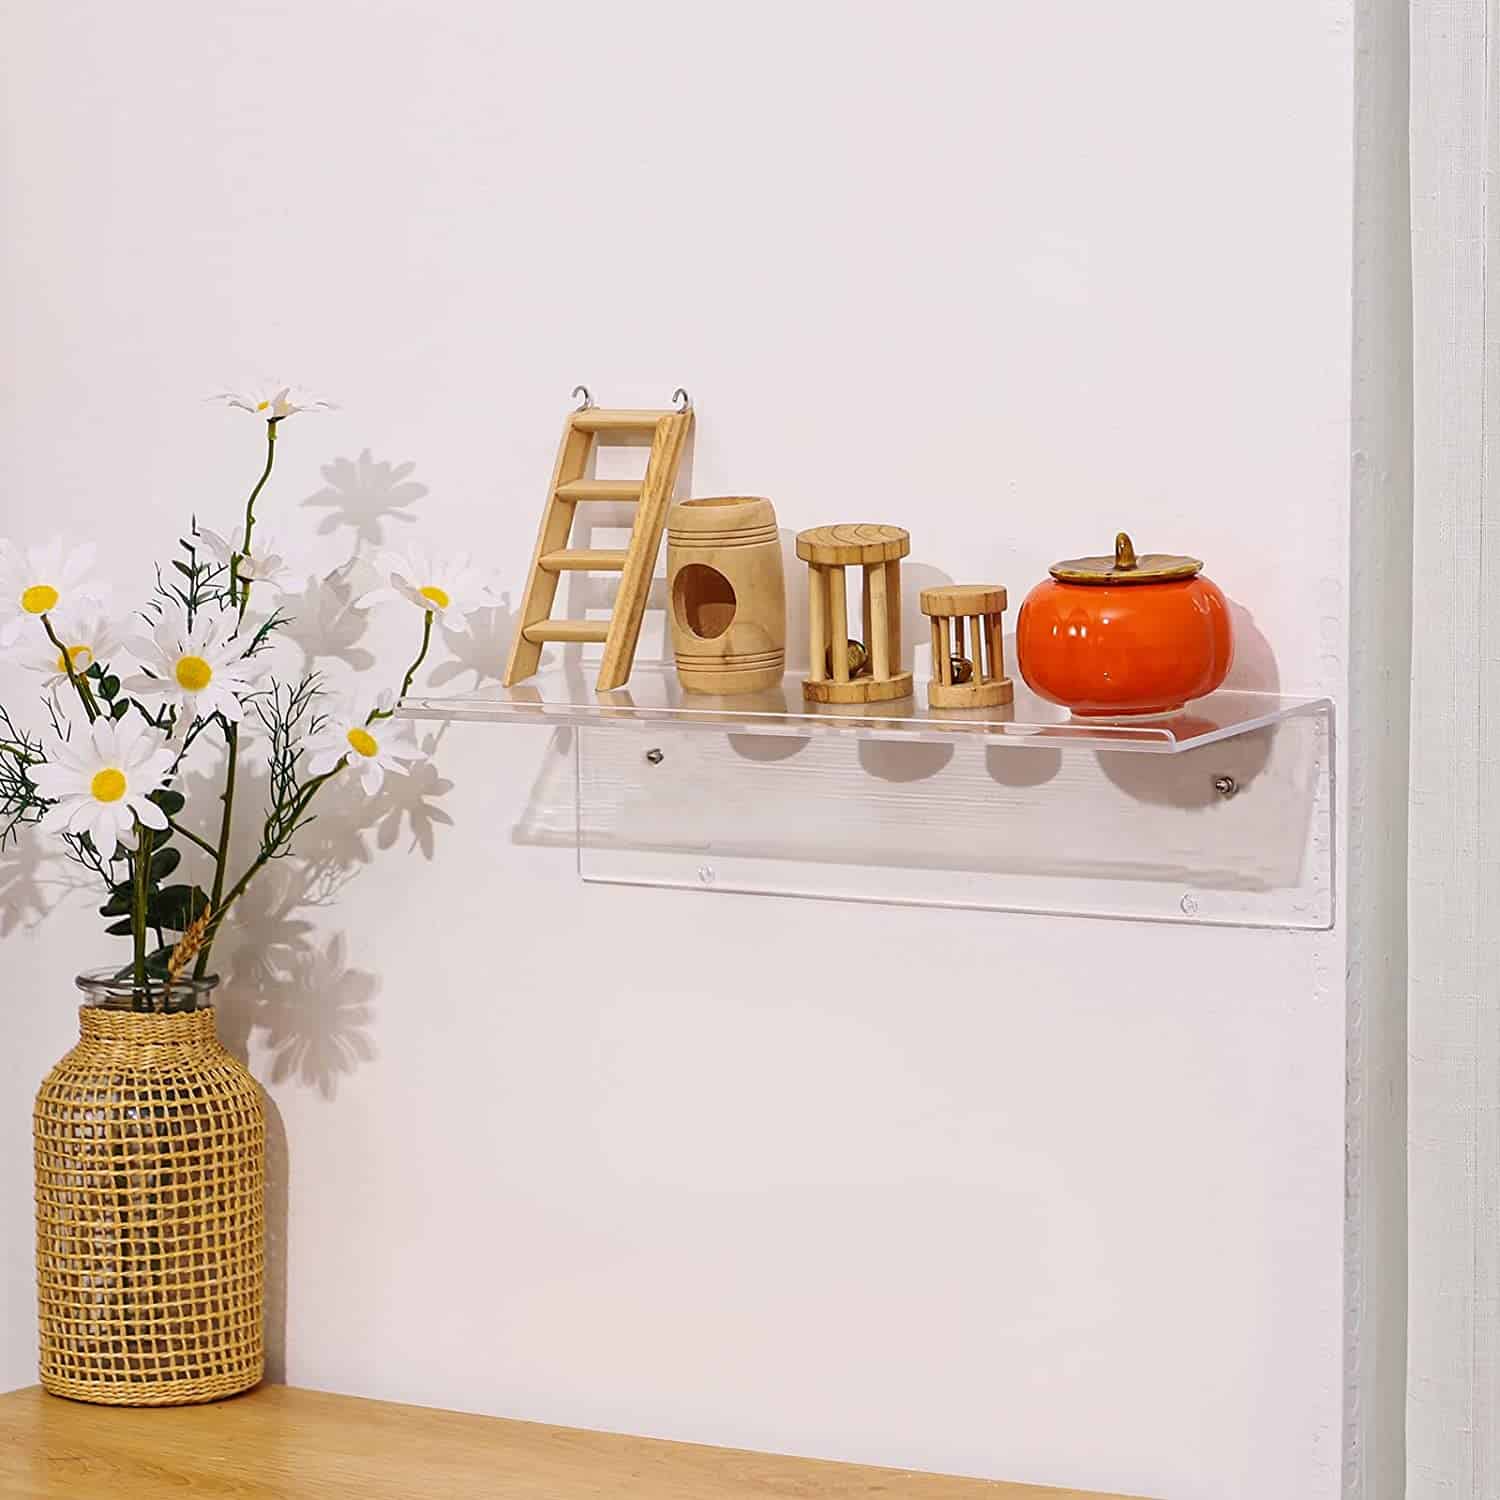 clear acrylic floating shelf for displaying Lego builds or small objects